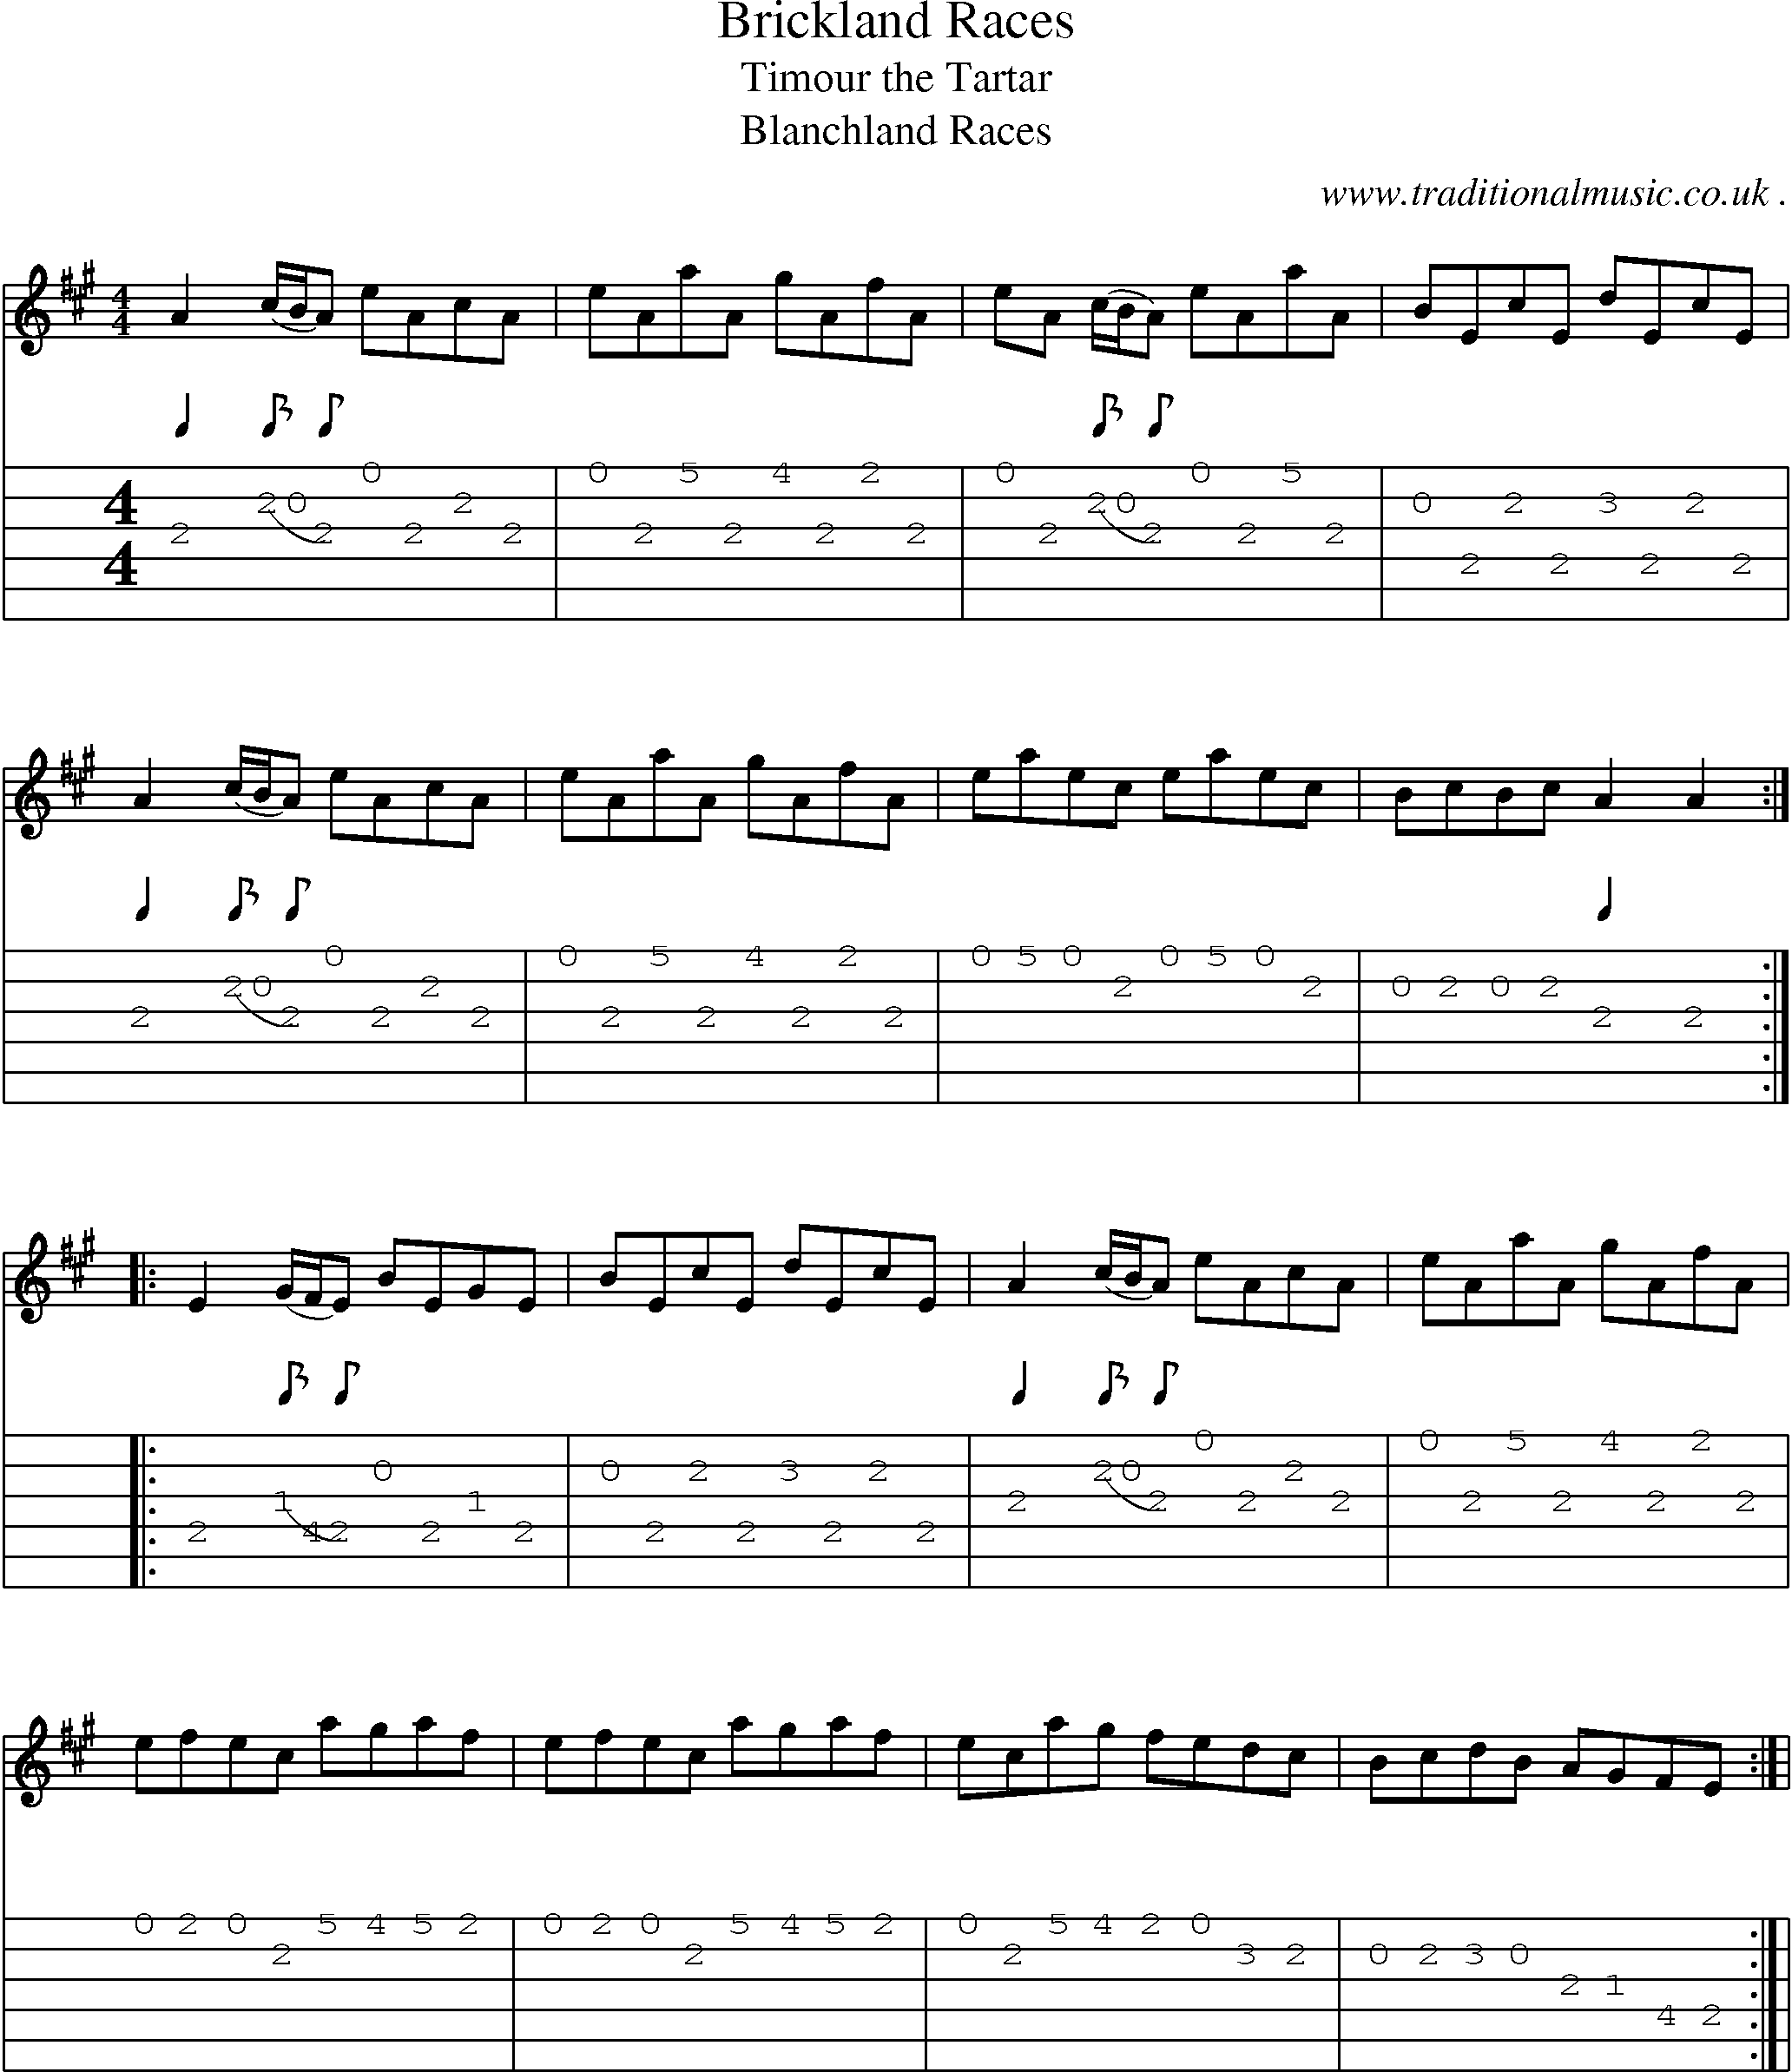 Sheet-Music and Guitar Tabs for Brickland Races